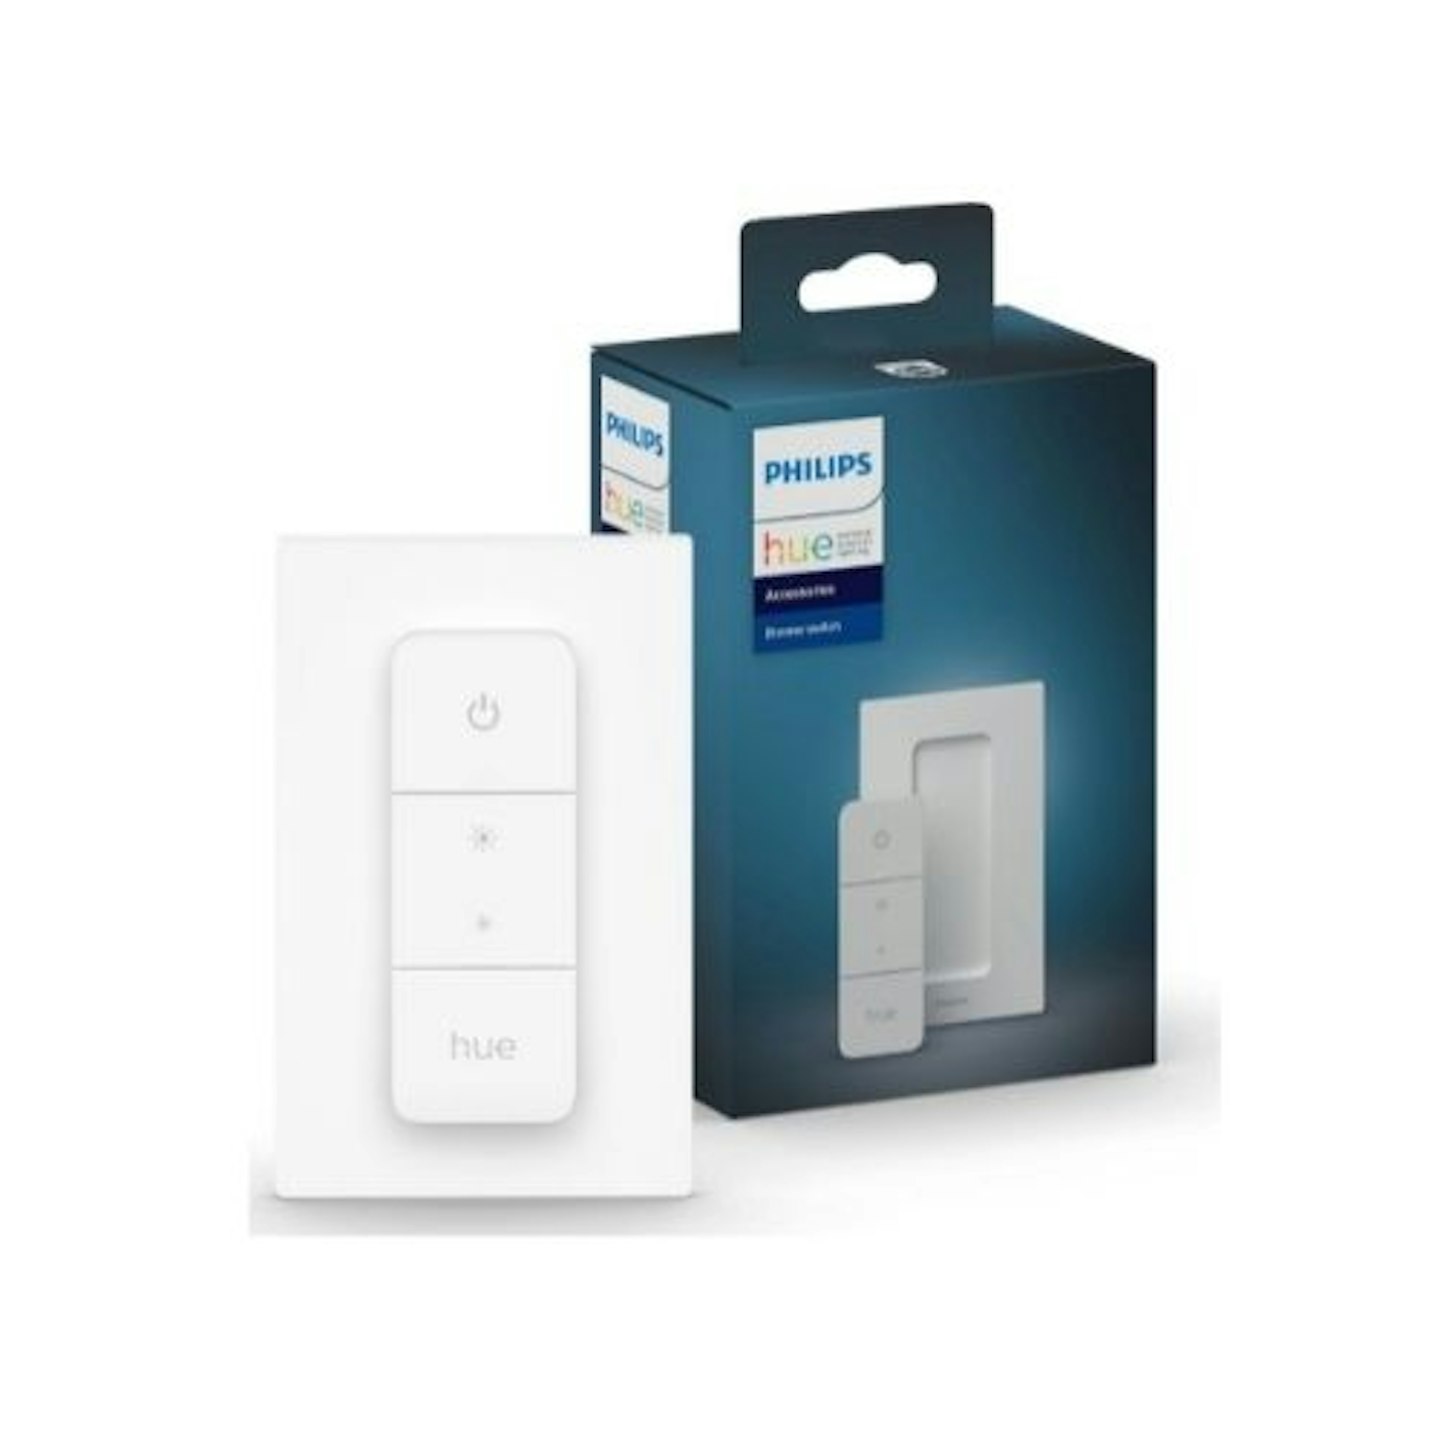 Philips Hue Smart Dimmer Switch 2